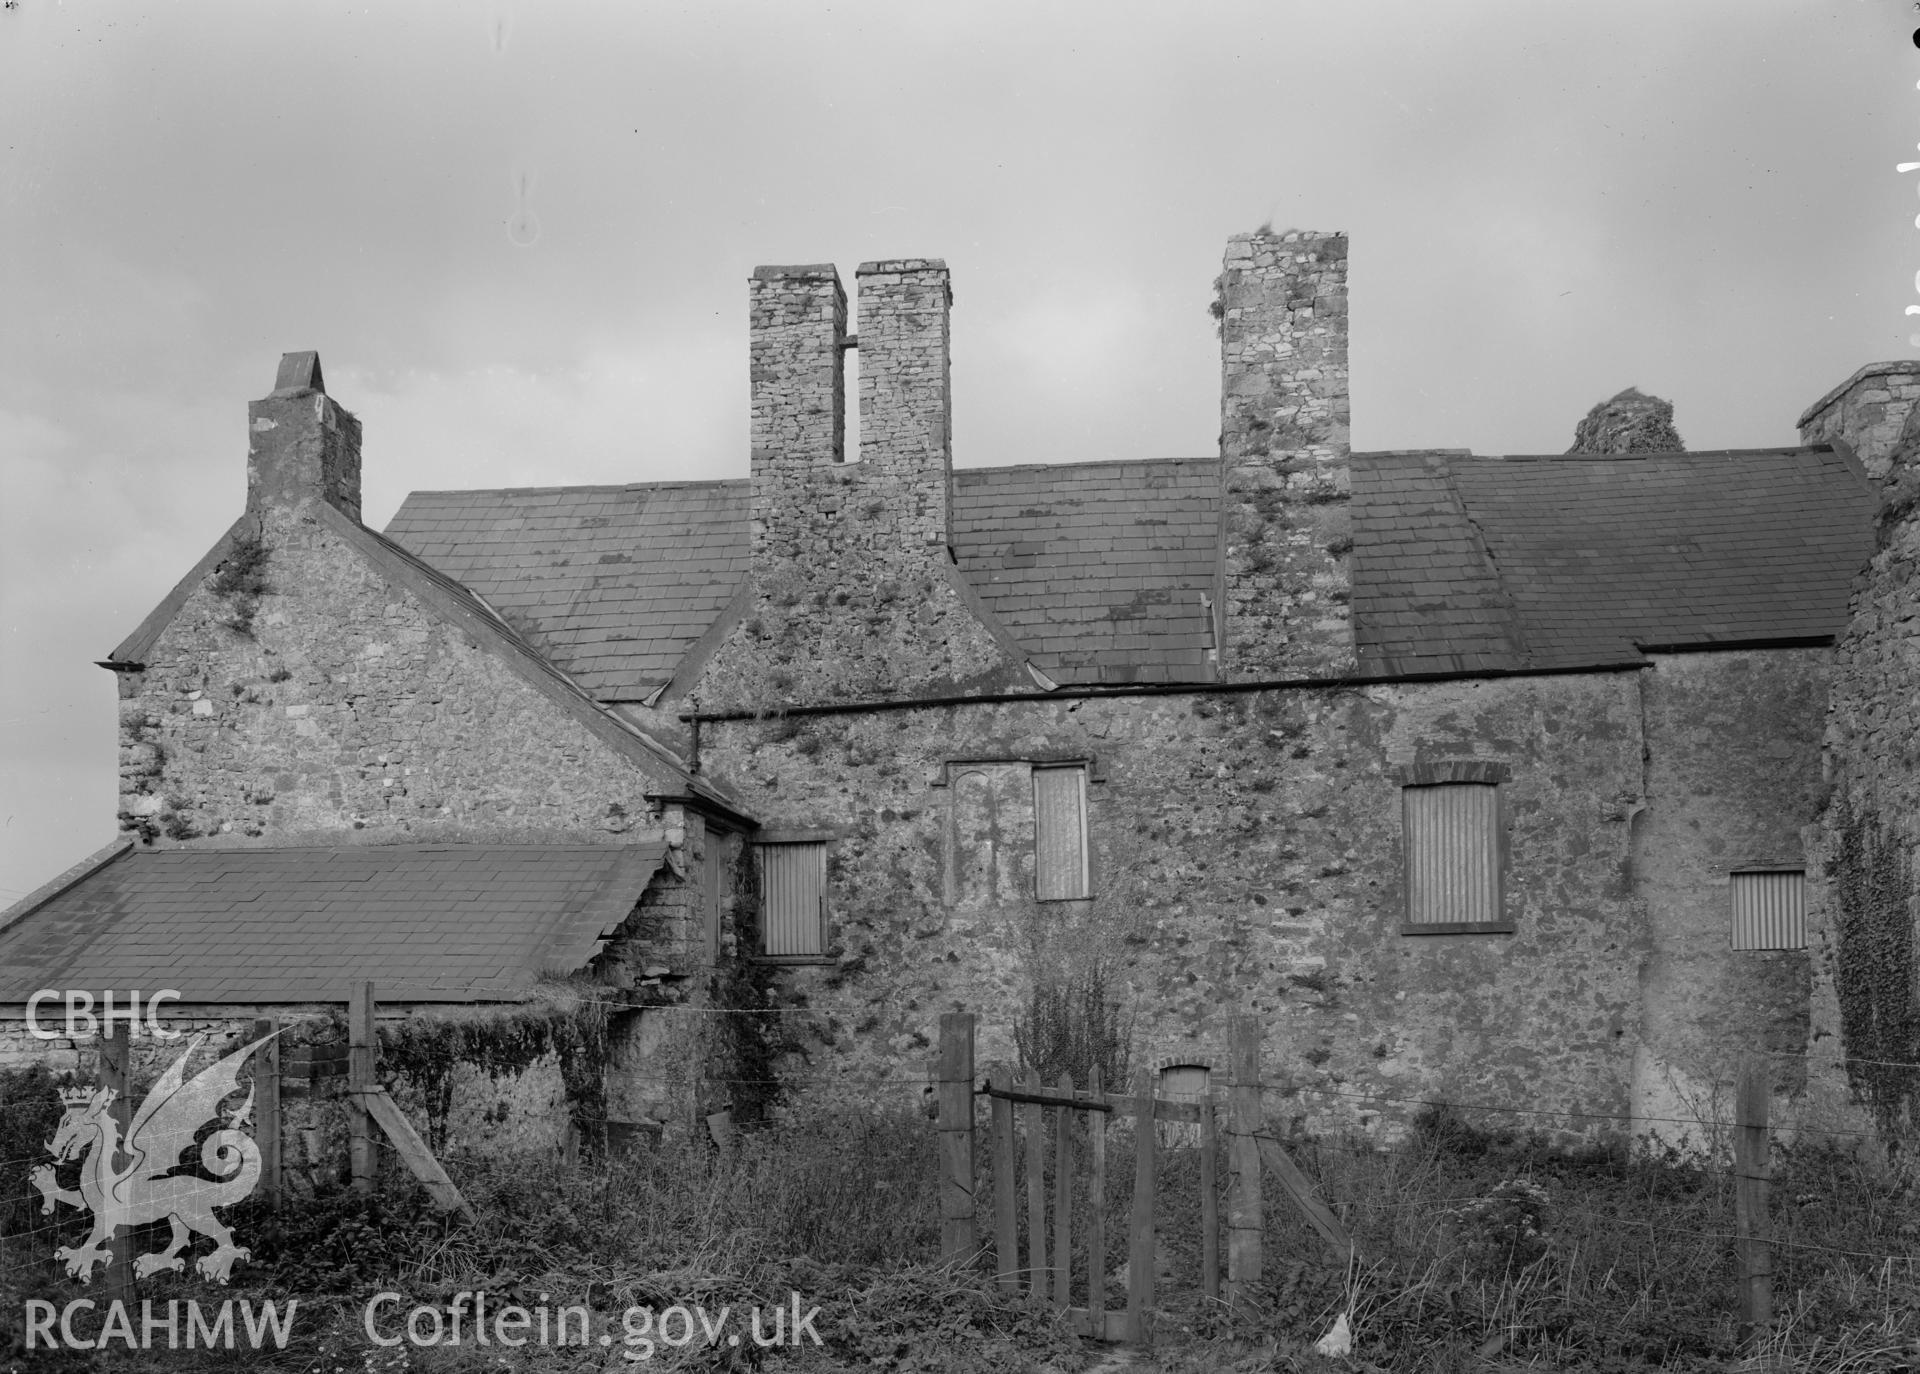 D.O.E photograph of Oxwich Castle - south wing from the south.